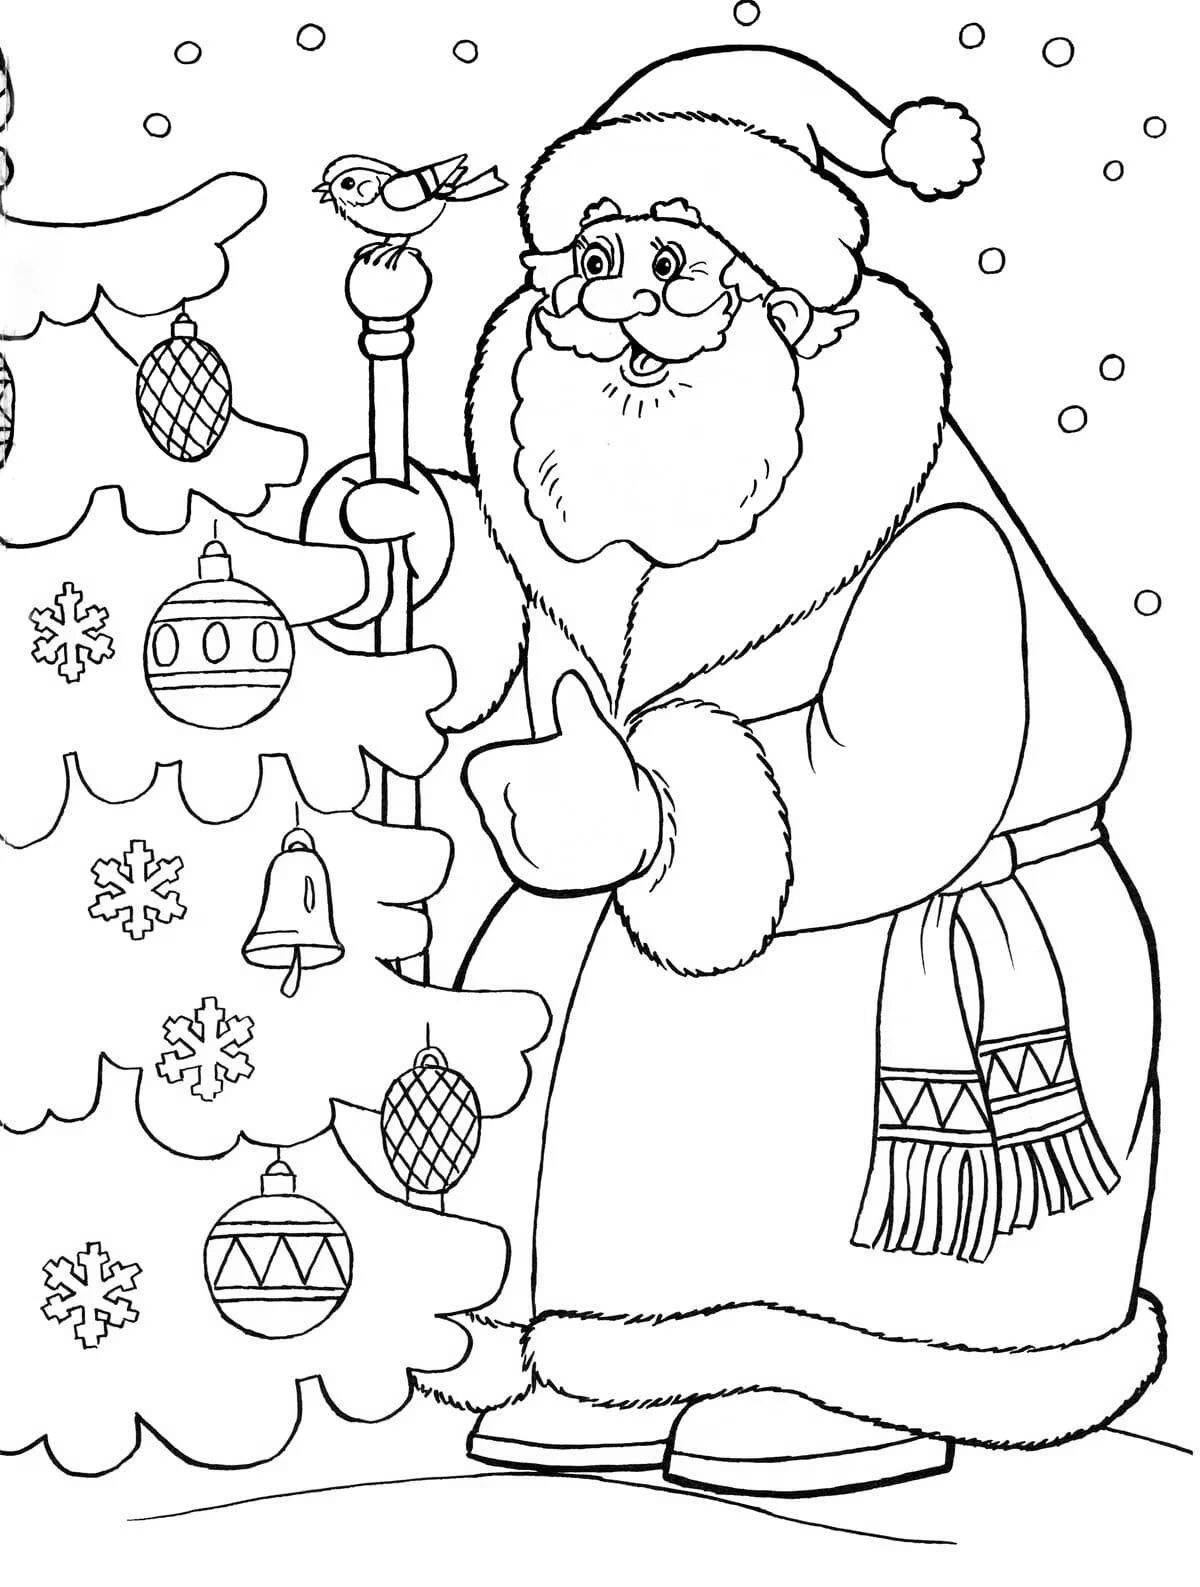 Merry Christmas coloring pages of Santa Claus and the Snow Maiden